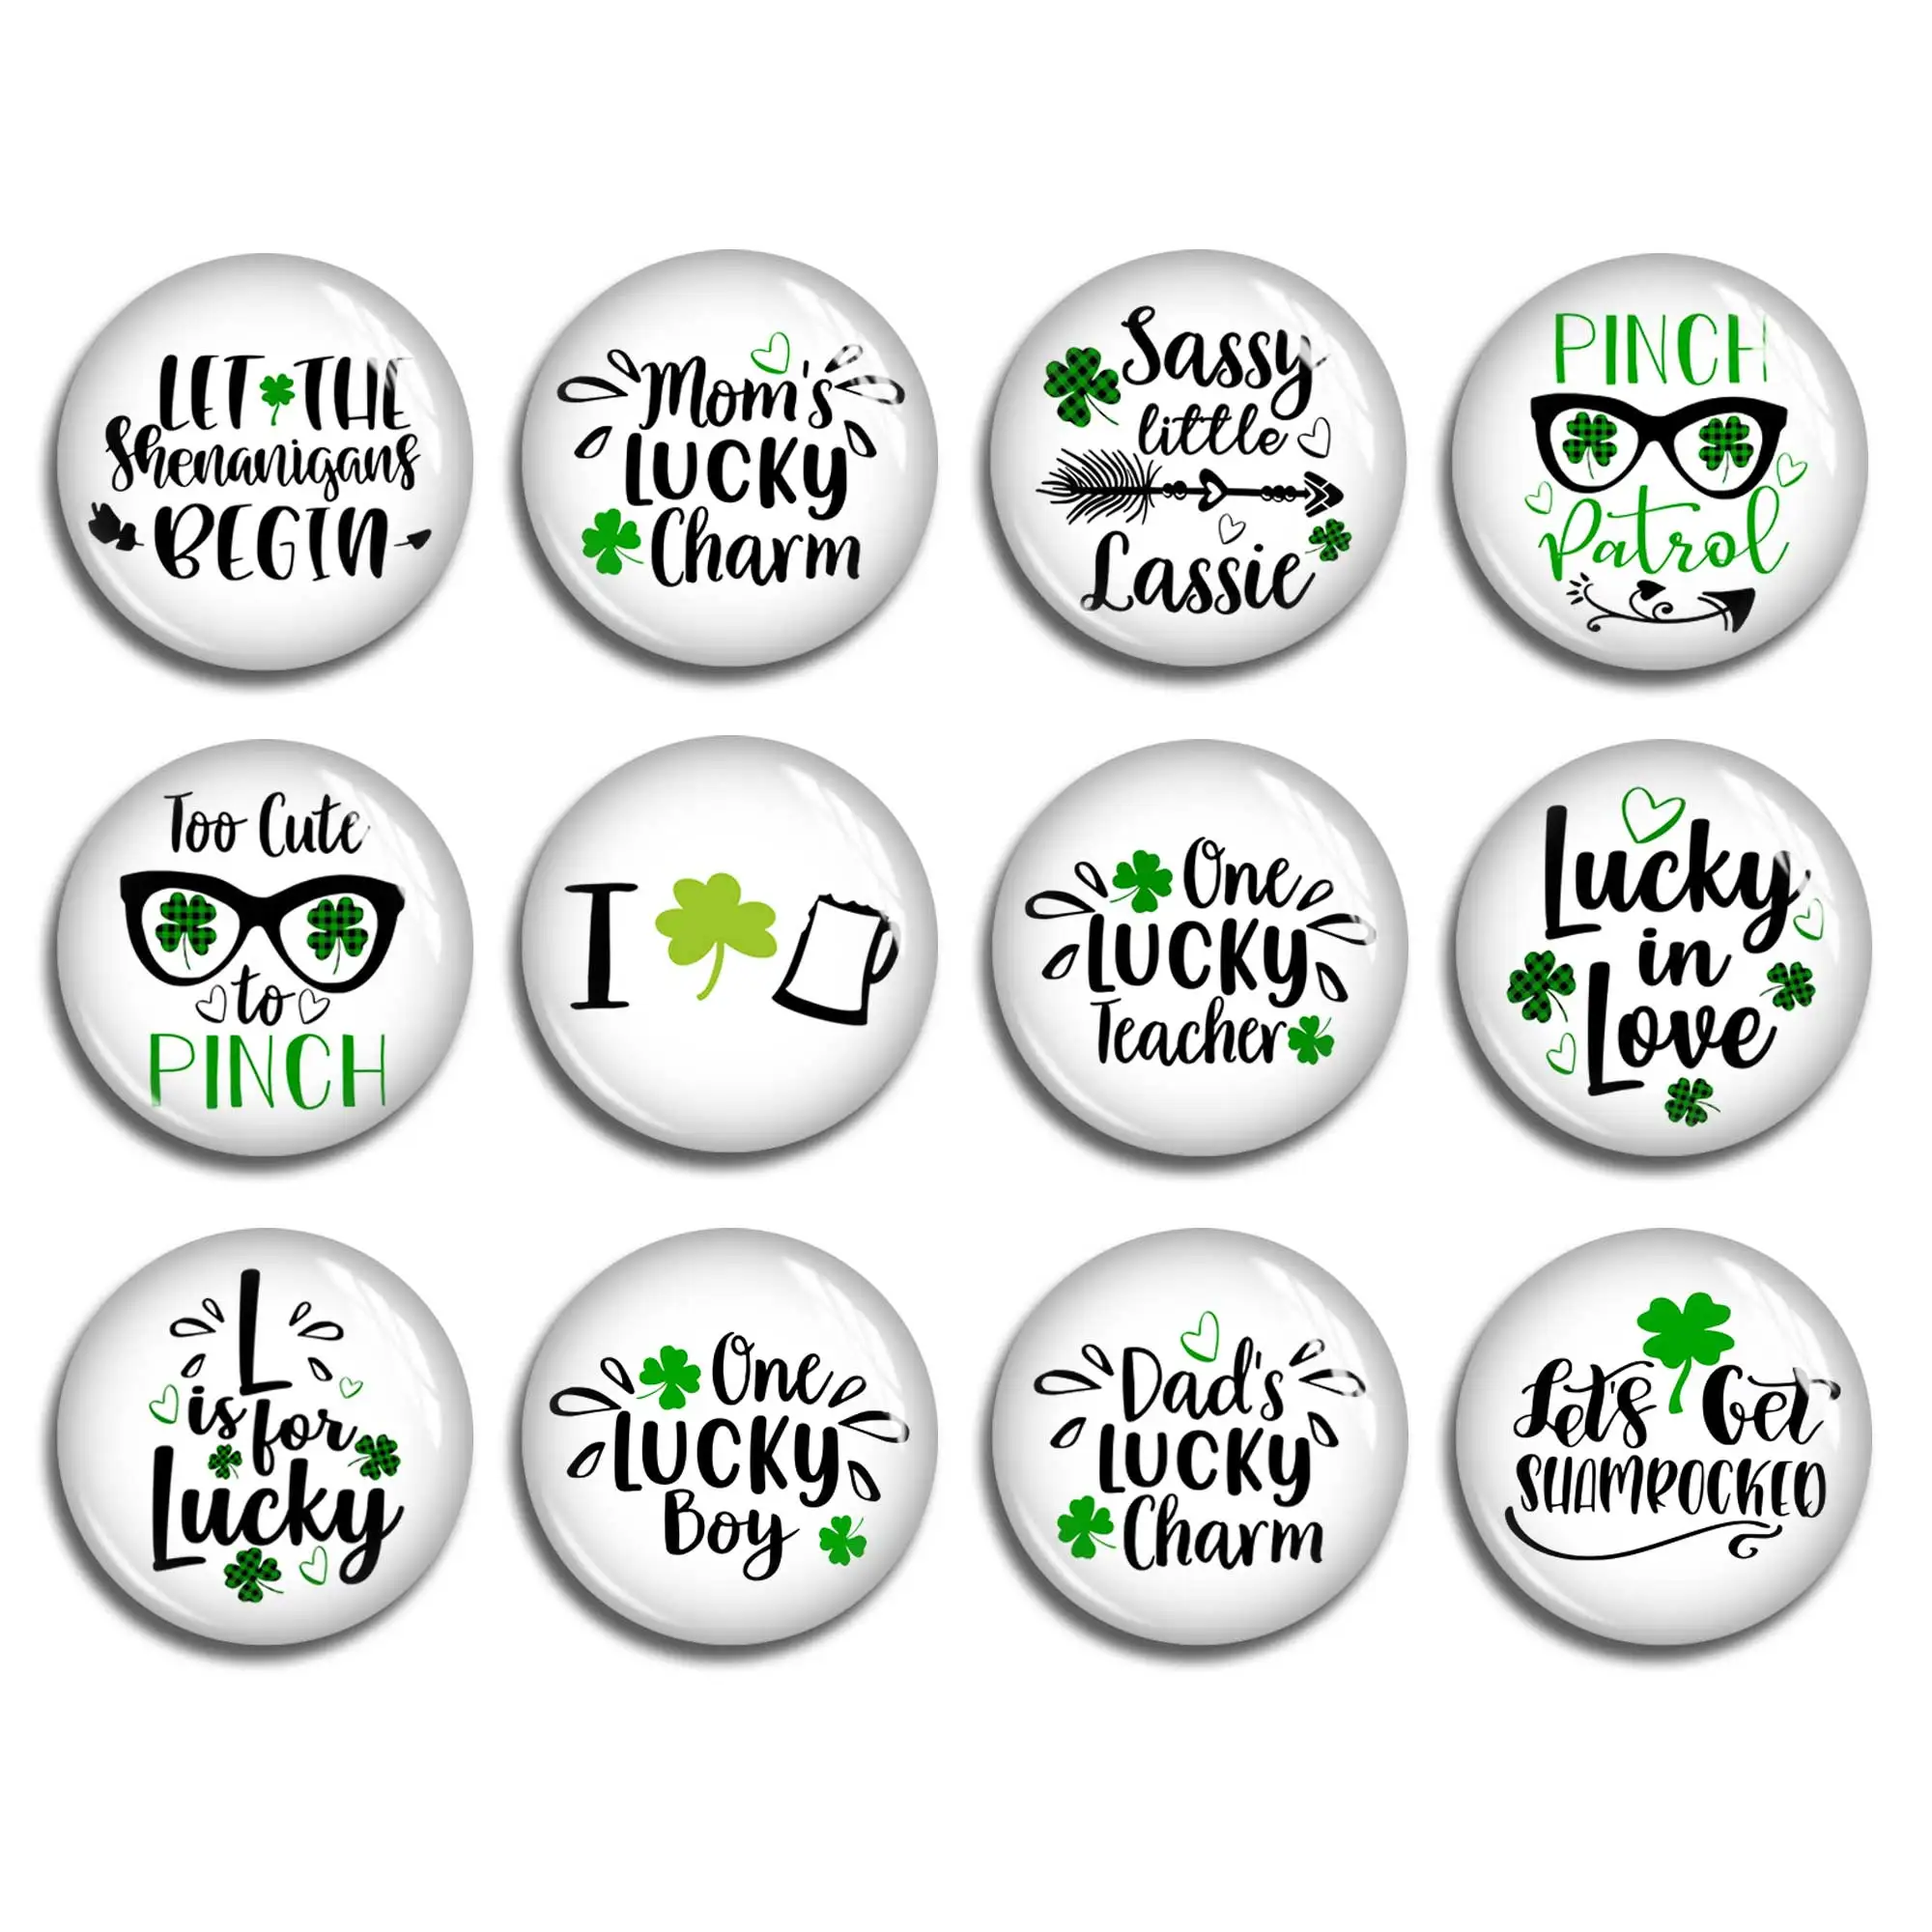 

Lucly Clover Cabochon, Green Clover Image Glass dome, 10mm 12mm 14mm 16mm 18mm 20mm 25mm 30mm 35mm 40mm Picture Beads - FJ2427